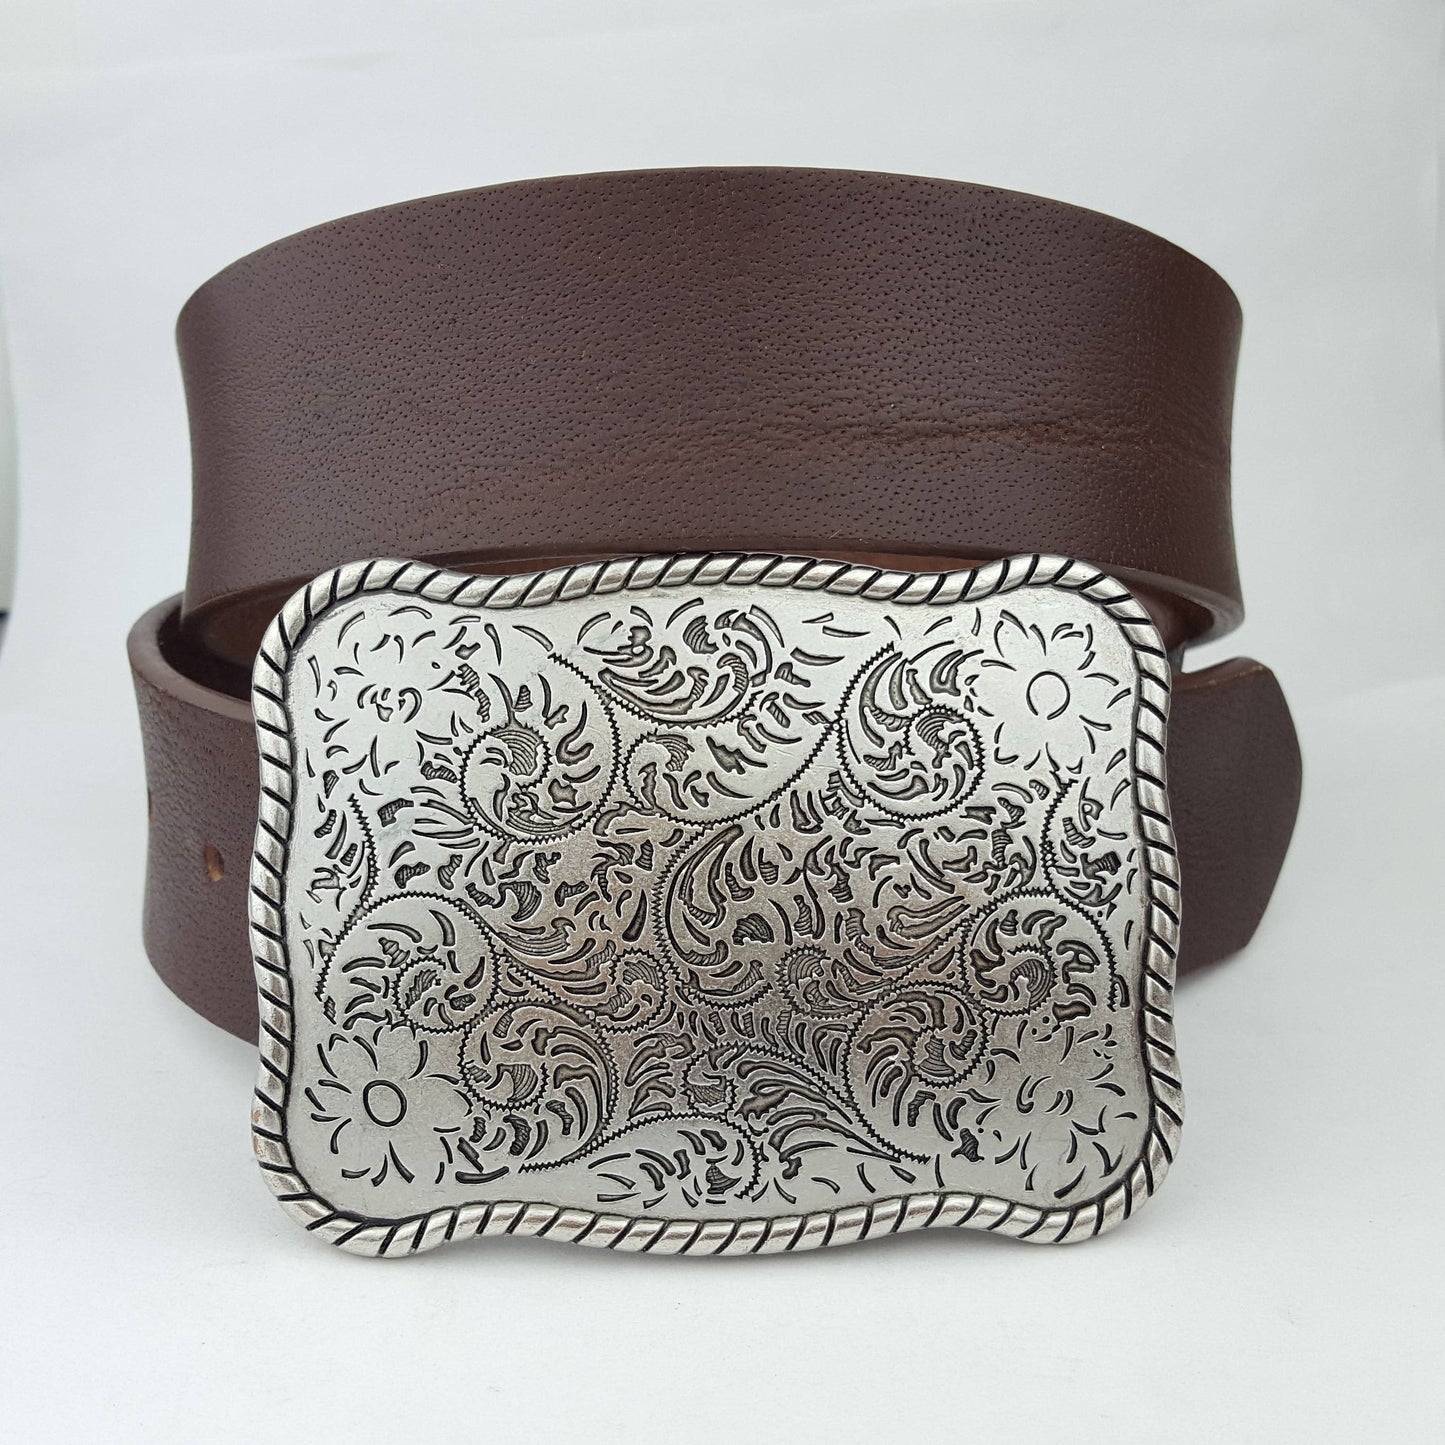 Brown Genuine Leather belt w/ Western Etched Floral Plaque Buckle